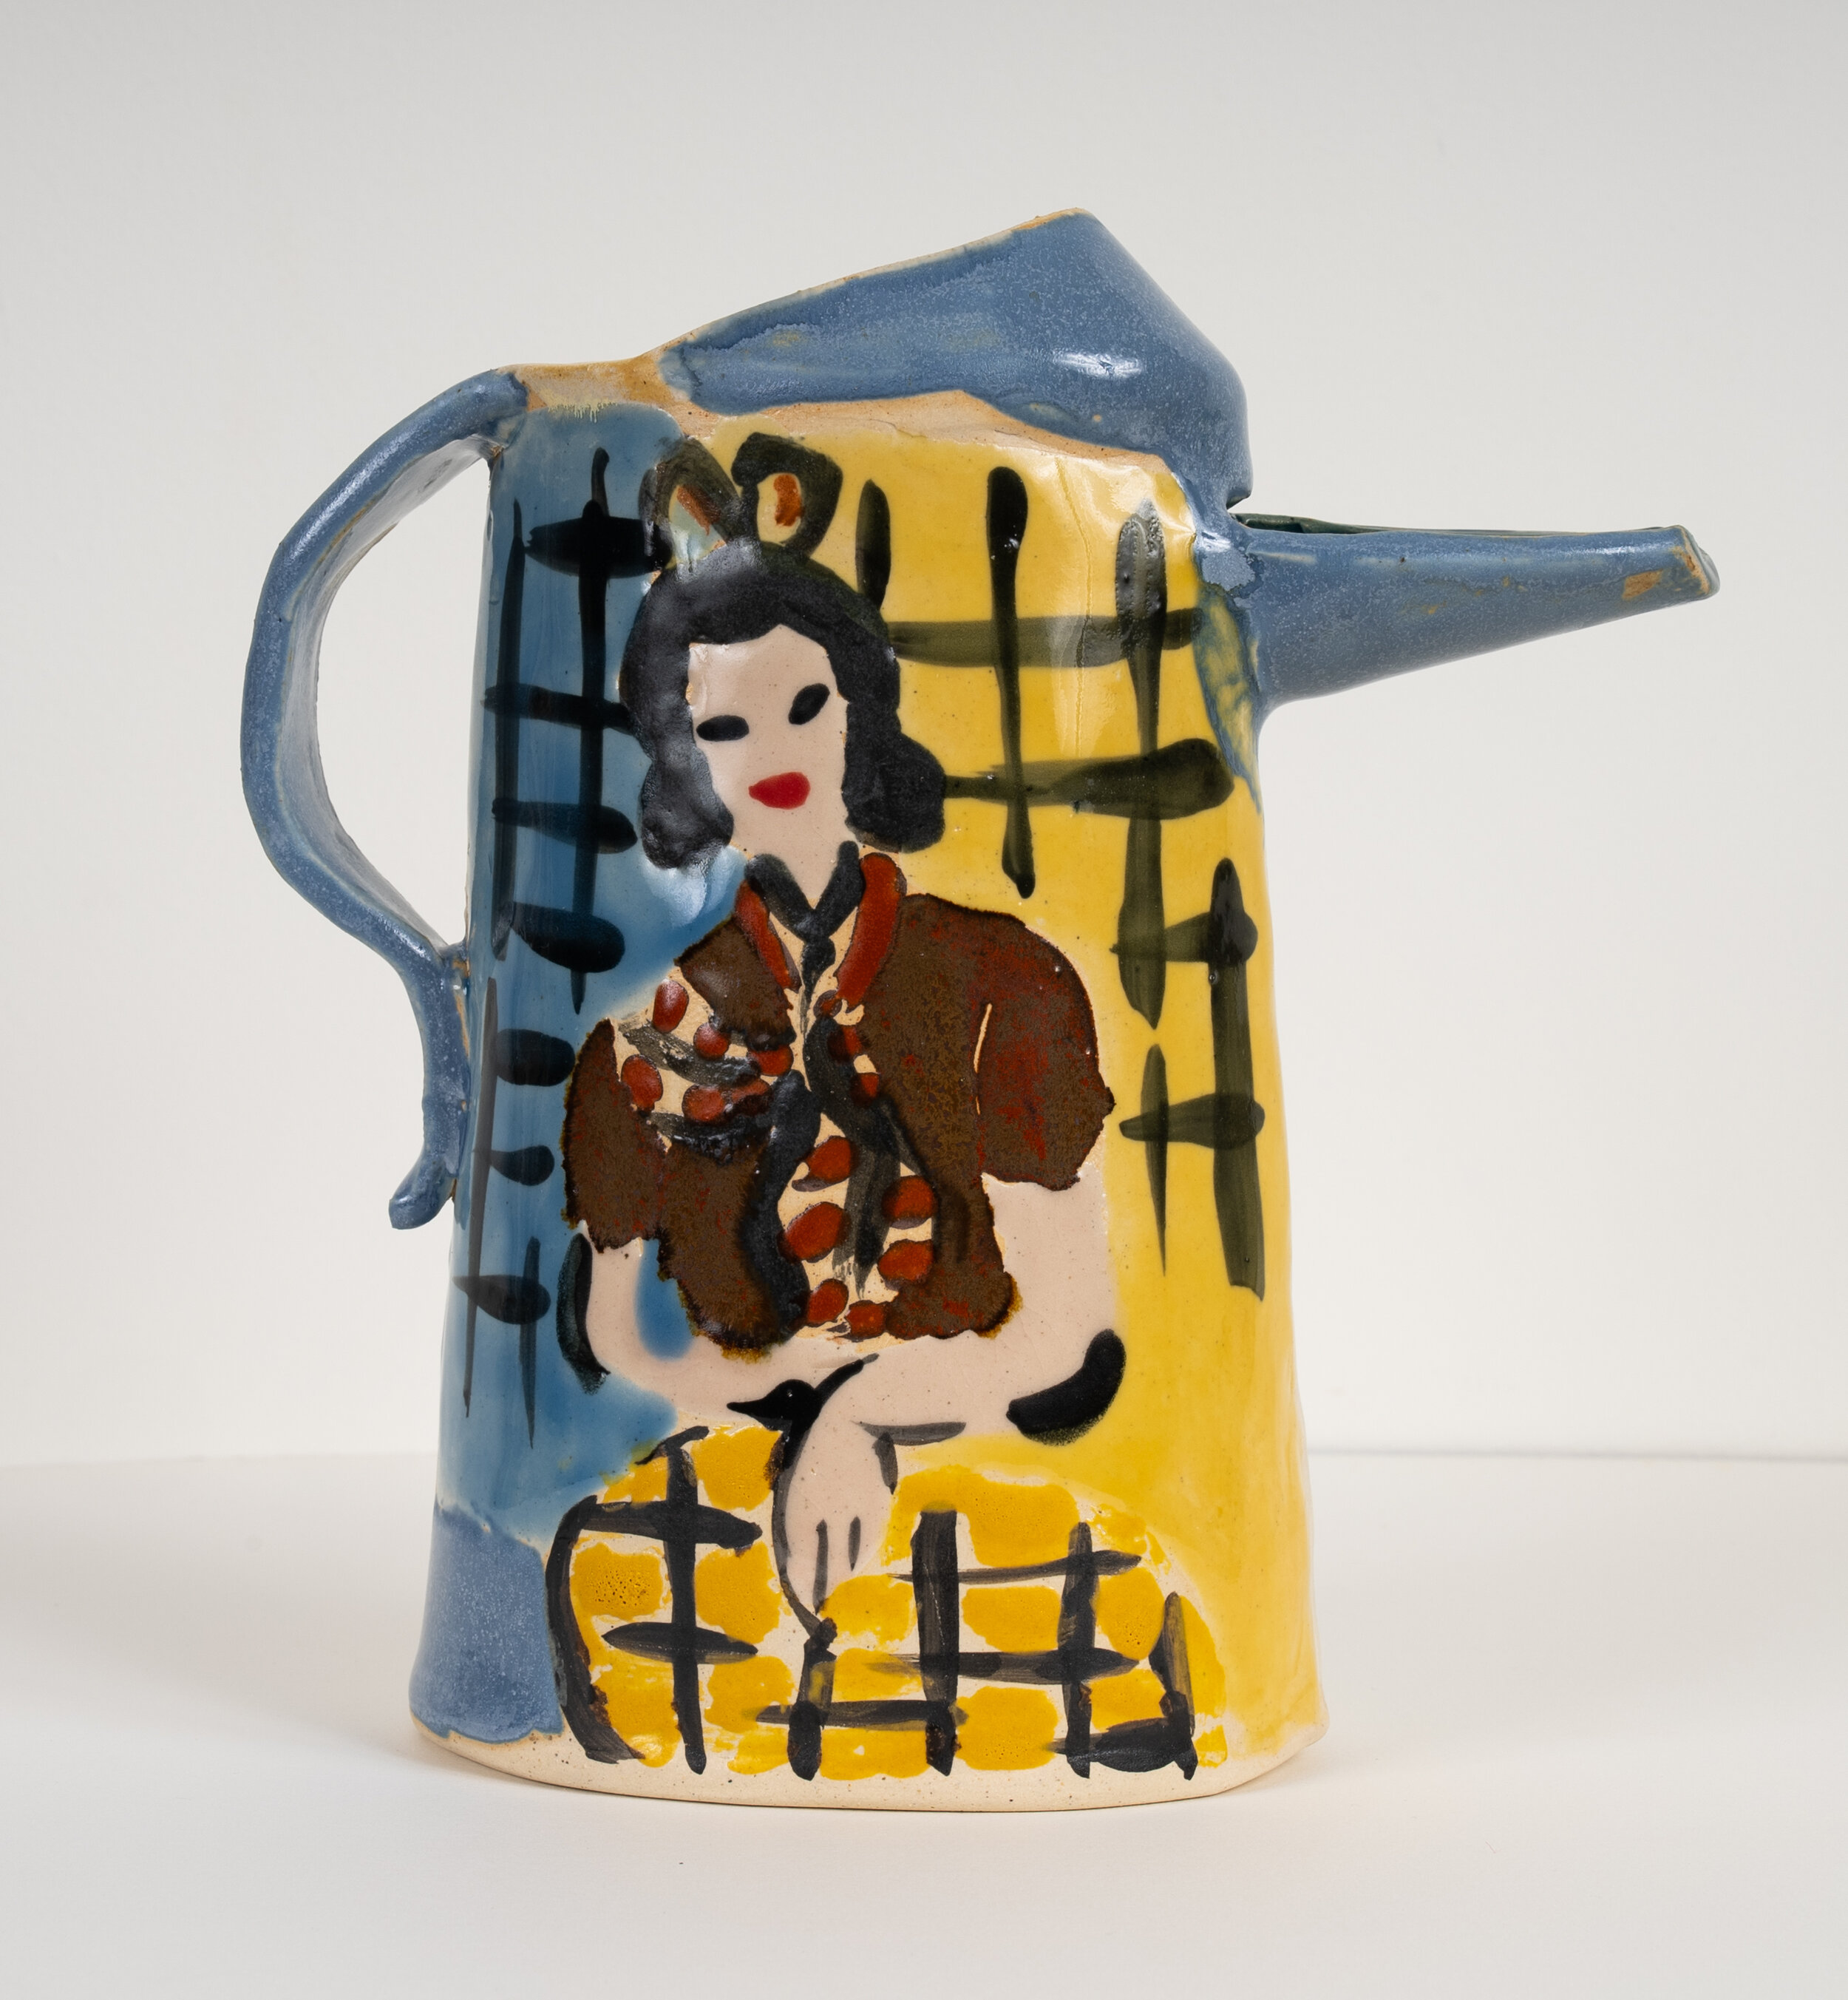 Woman on a Pitcher after Matisse, 2021